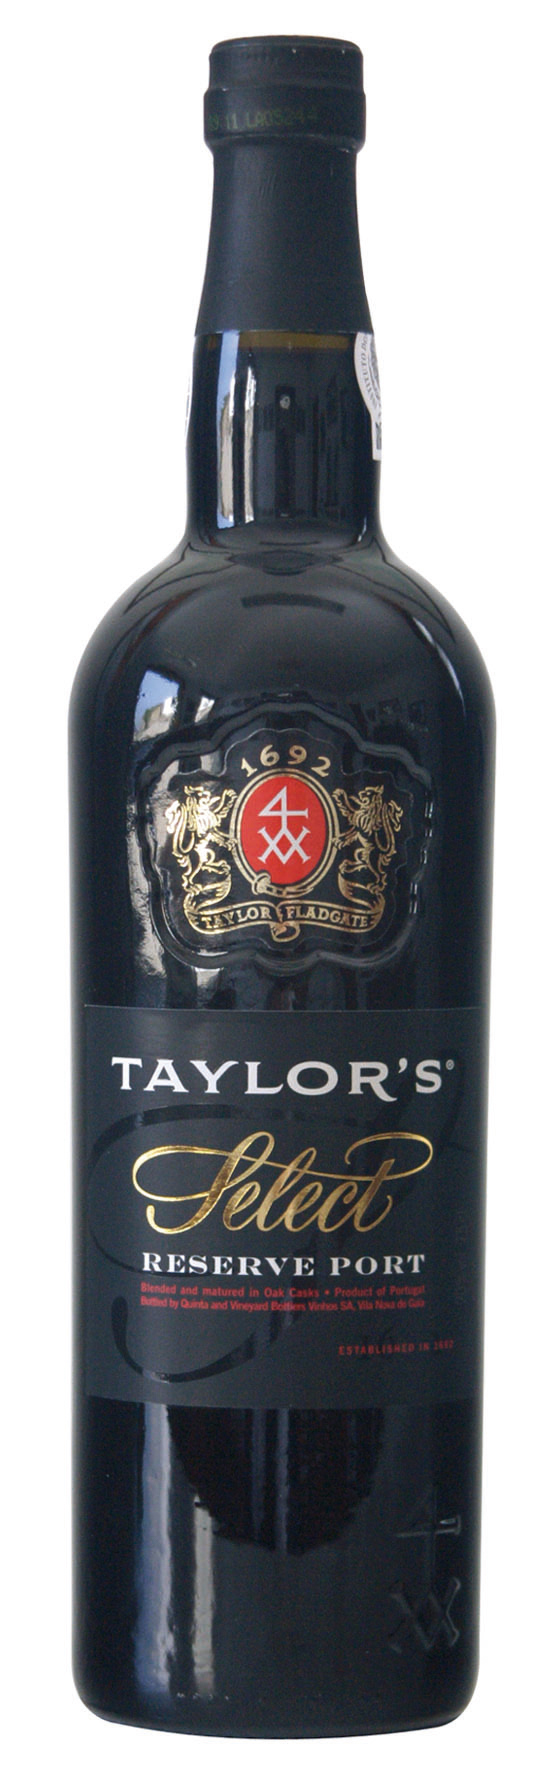 Taylor's Select Reserve Ruby 20% 0.75L